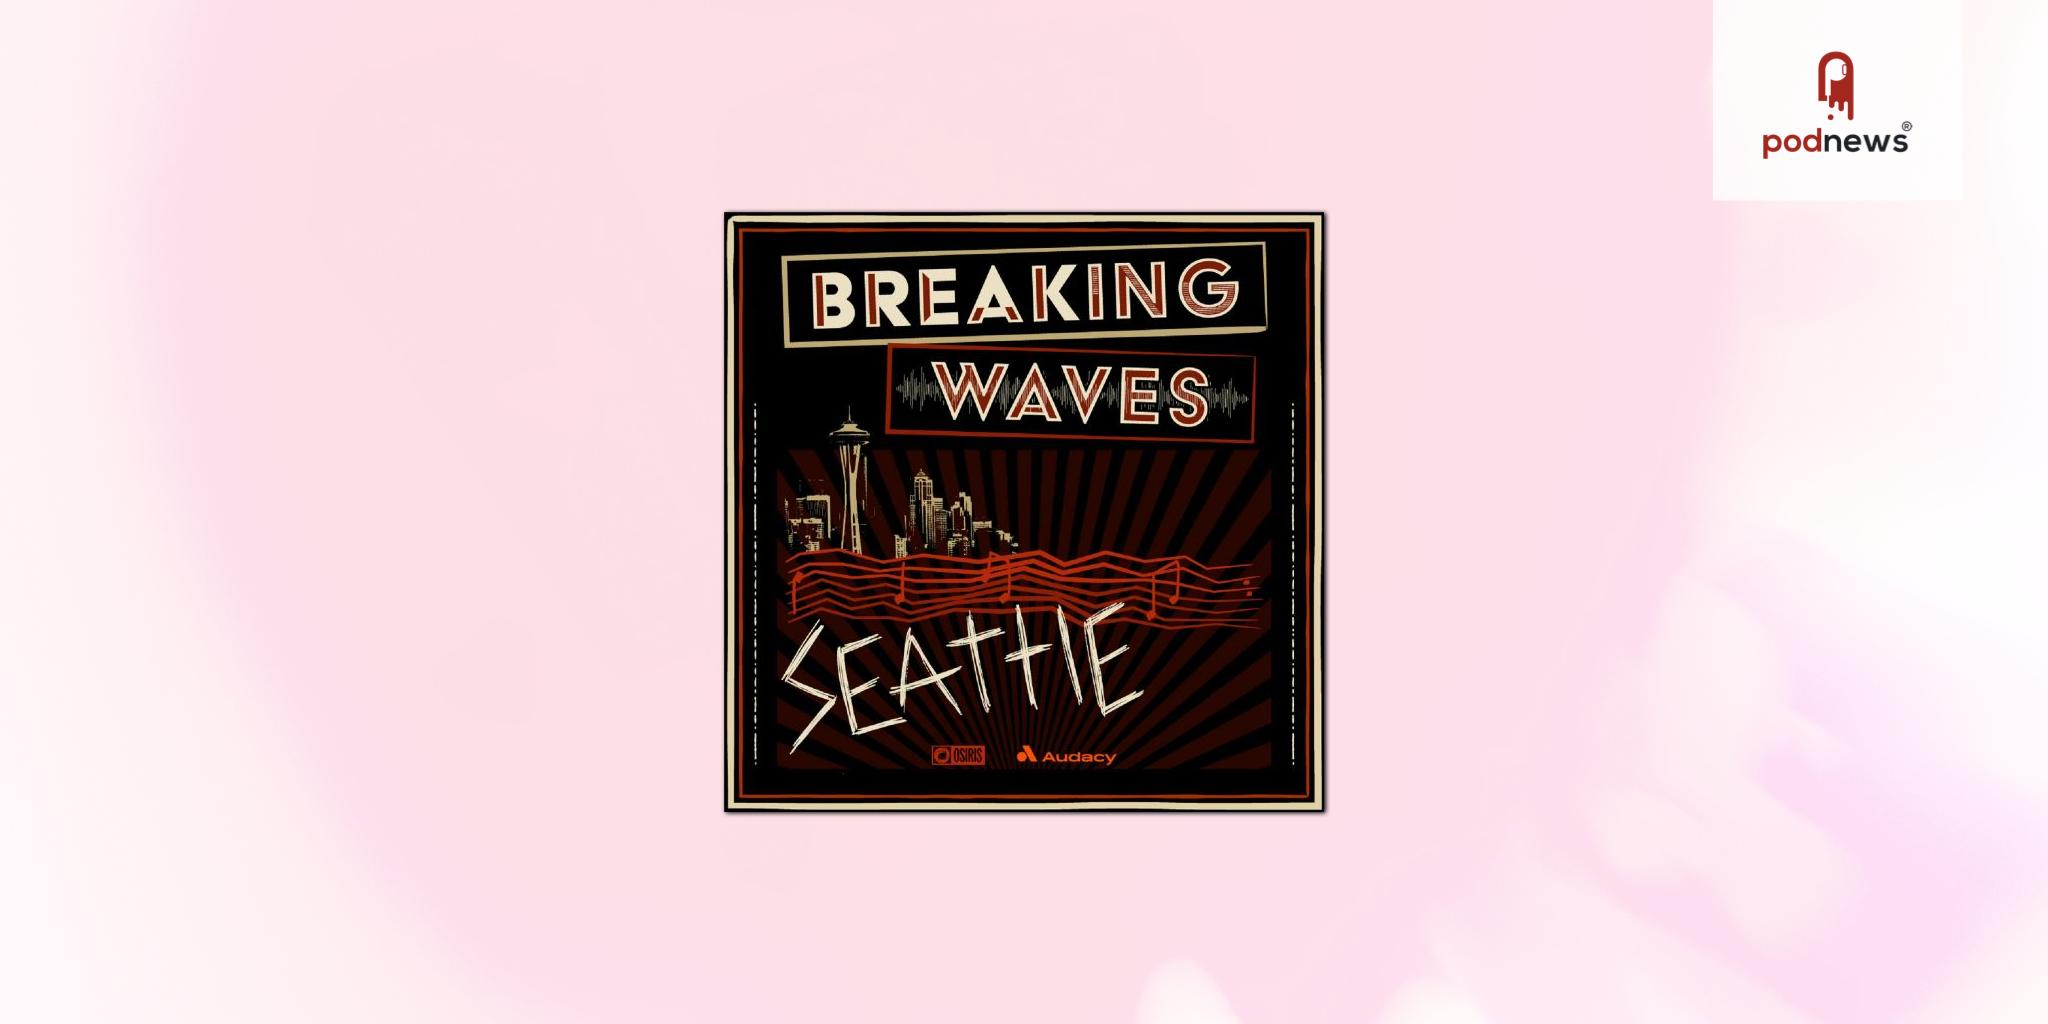 Audacy and Osiris Media launches Breaking Waves, a new podcast series examining popular music movements